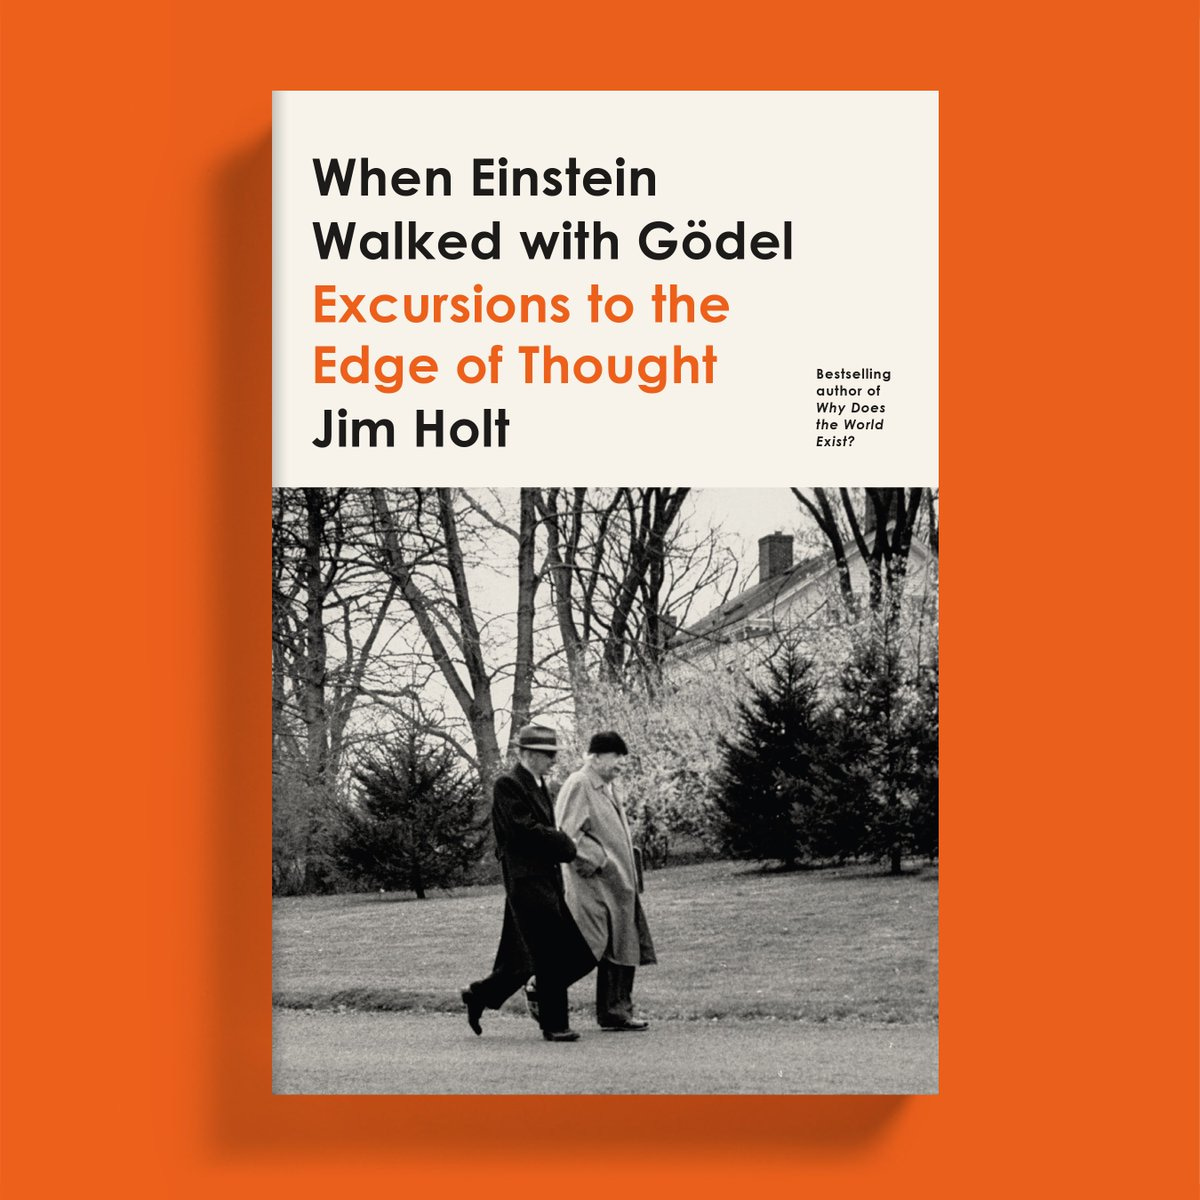 Farrar,Straus&Giroux on Twitter: "Happy #pubday to WHEN EINSTEIN WALKED  WITH GÖDEL, Jim Holt's entertaining and accessible guide to the most  profound scientific and mathematical ideas of recent centuries.  https://t.co/5ev91MJg5d https://t.co/NzqdpCzyQR ...